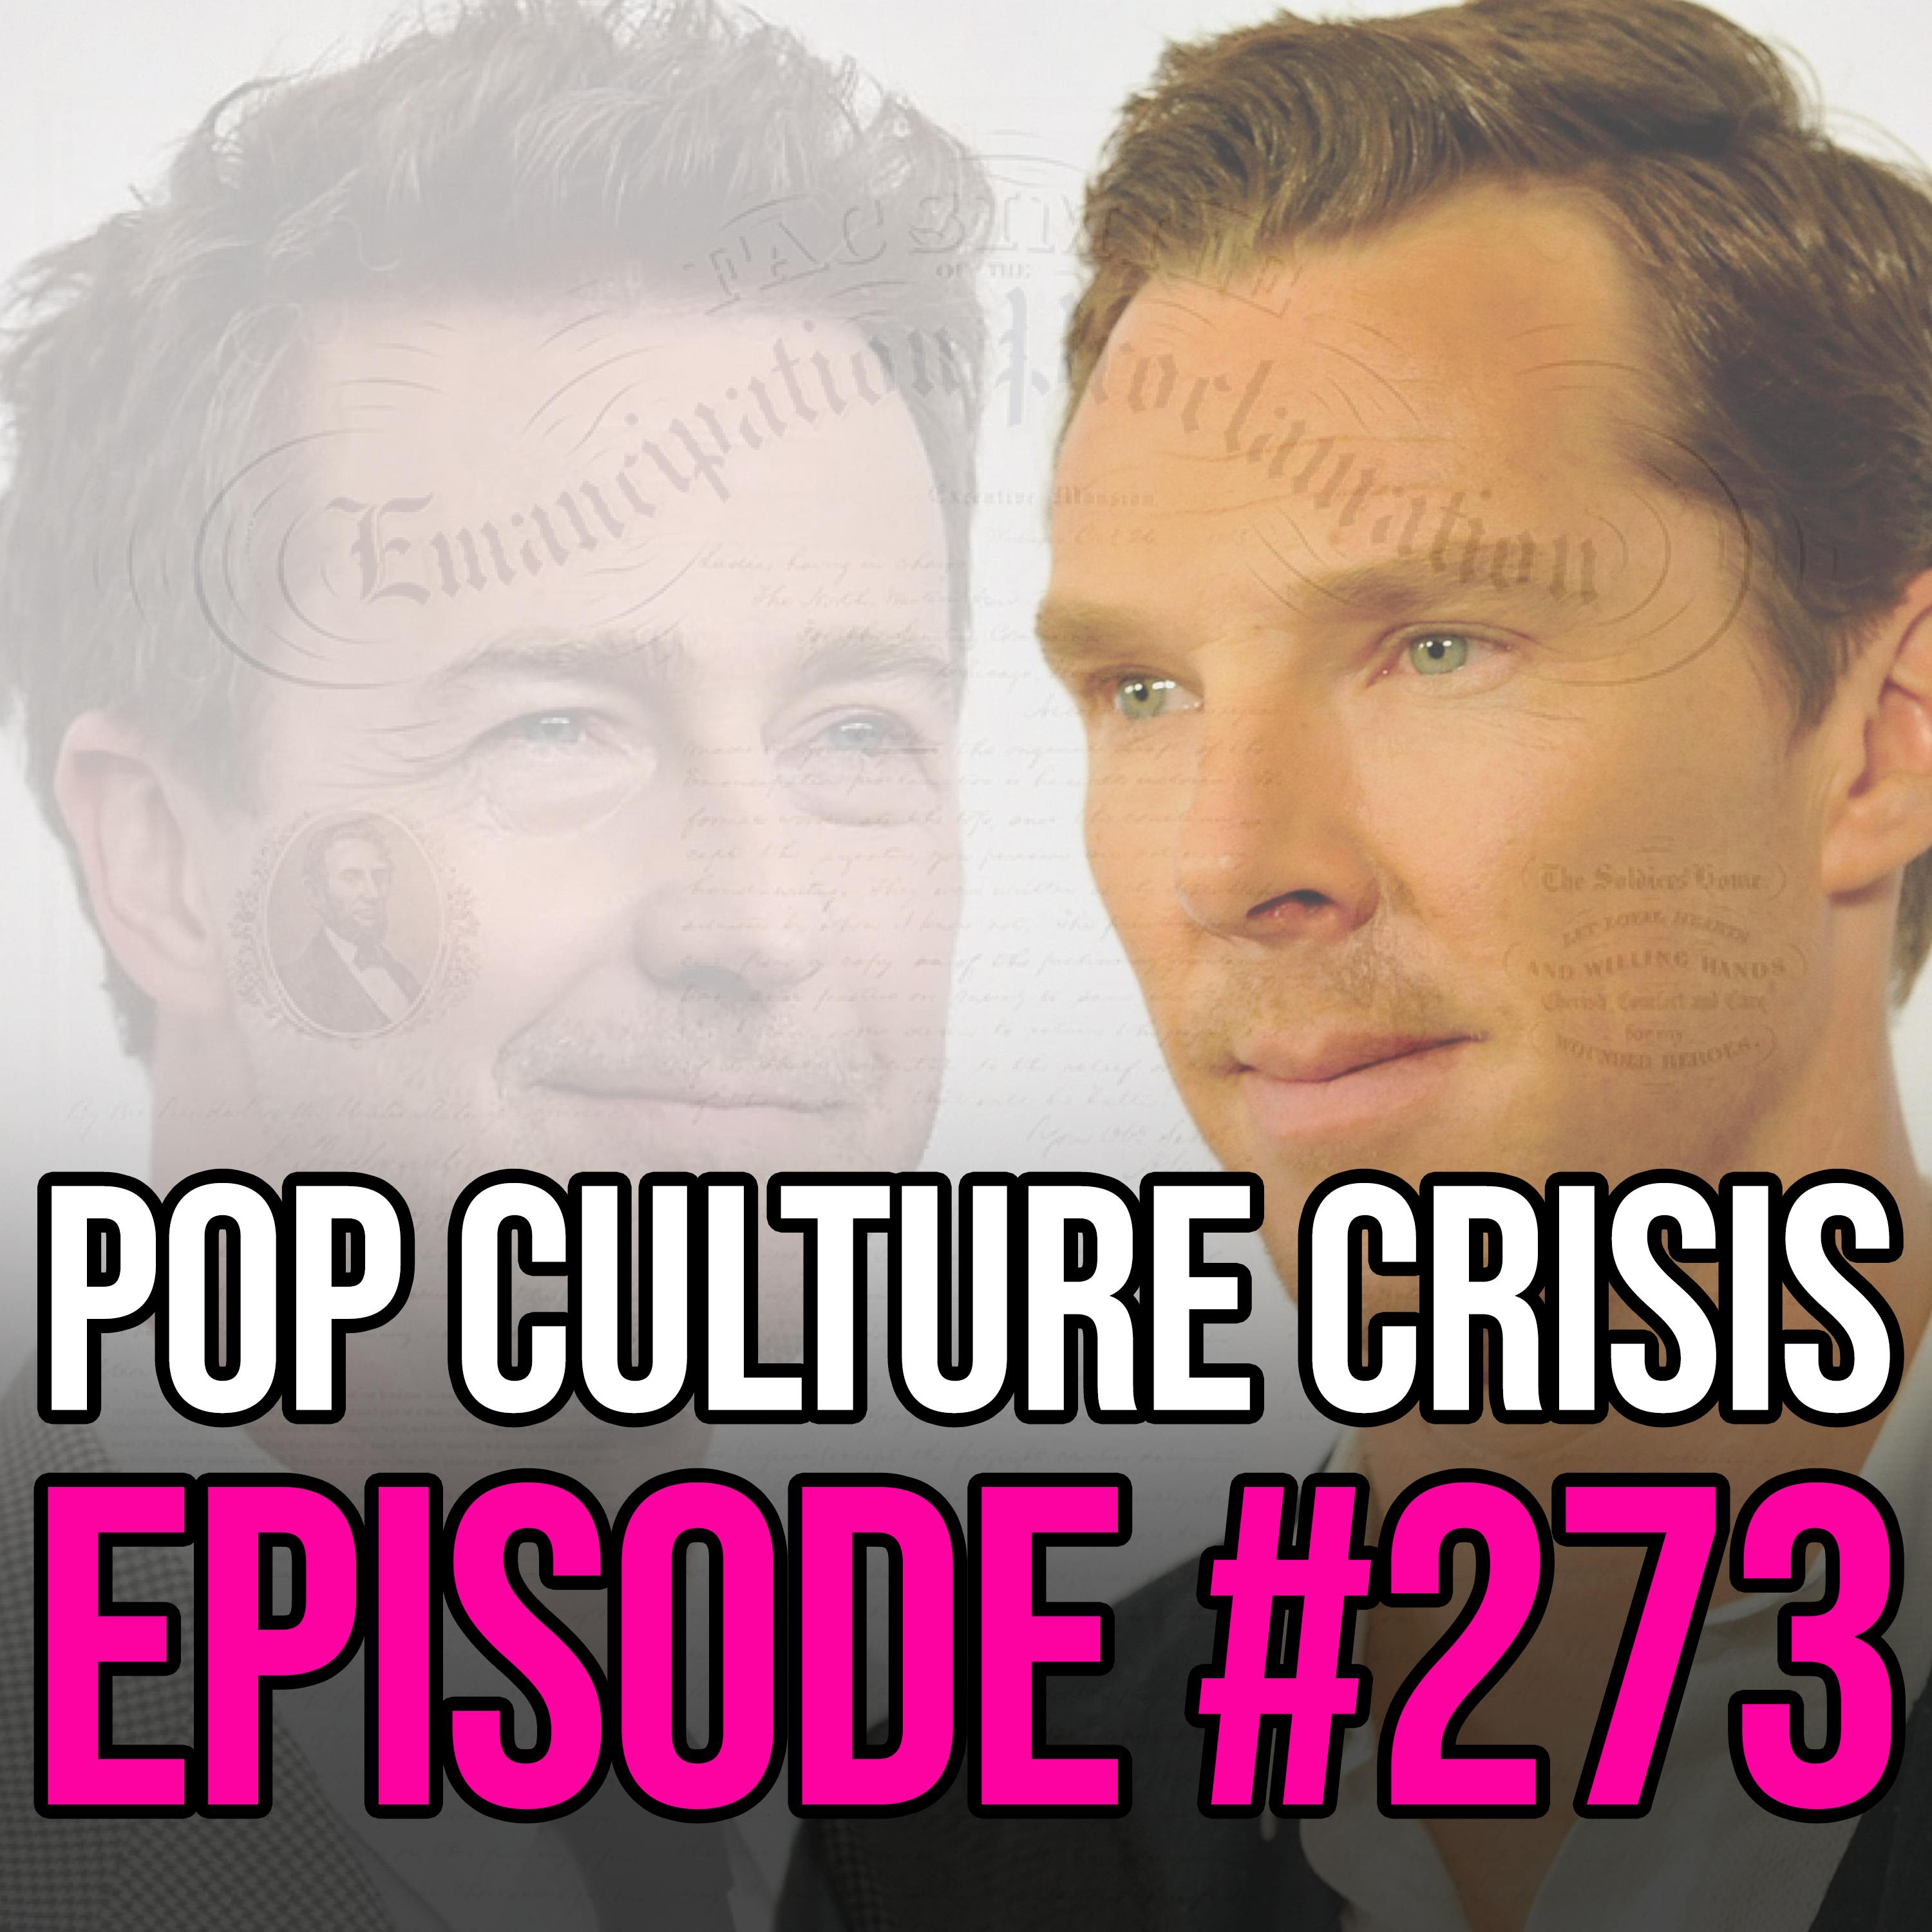 EPISODE 273: Dr. Strange May Have to Pay Reparations